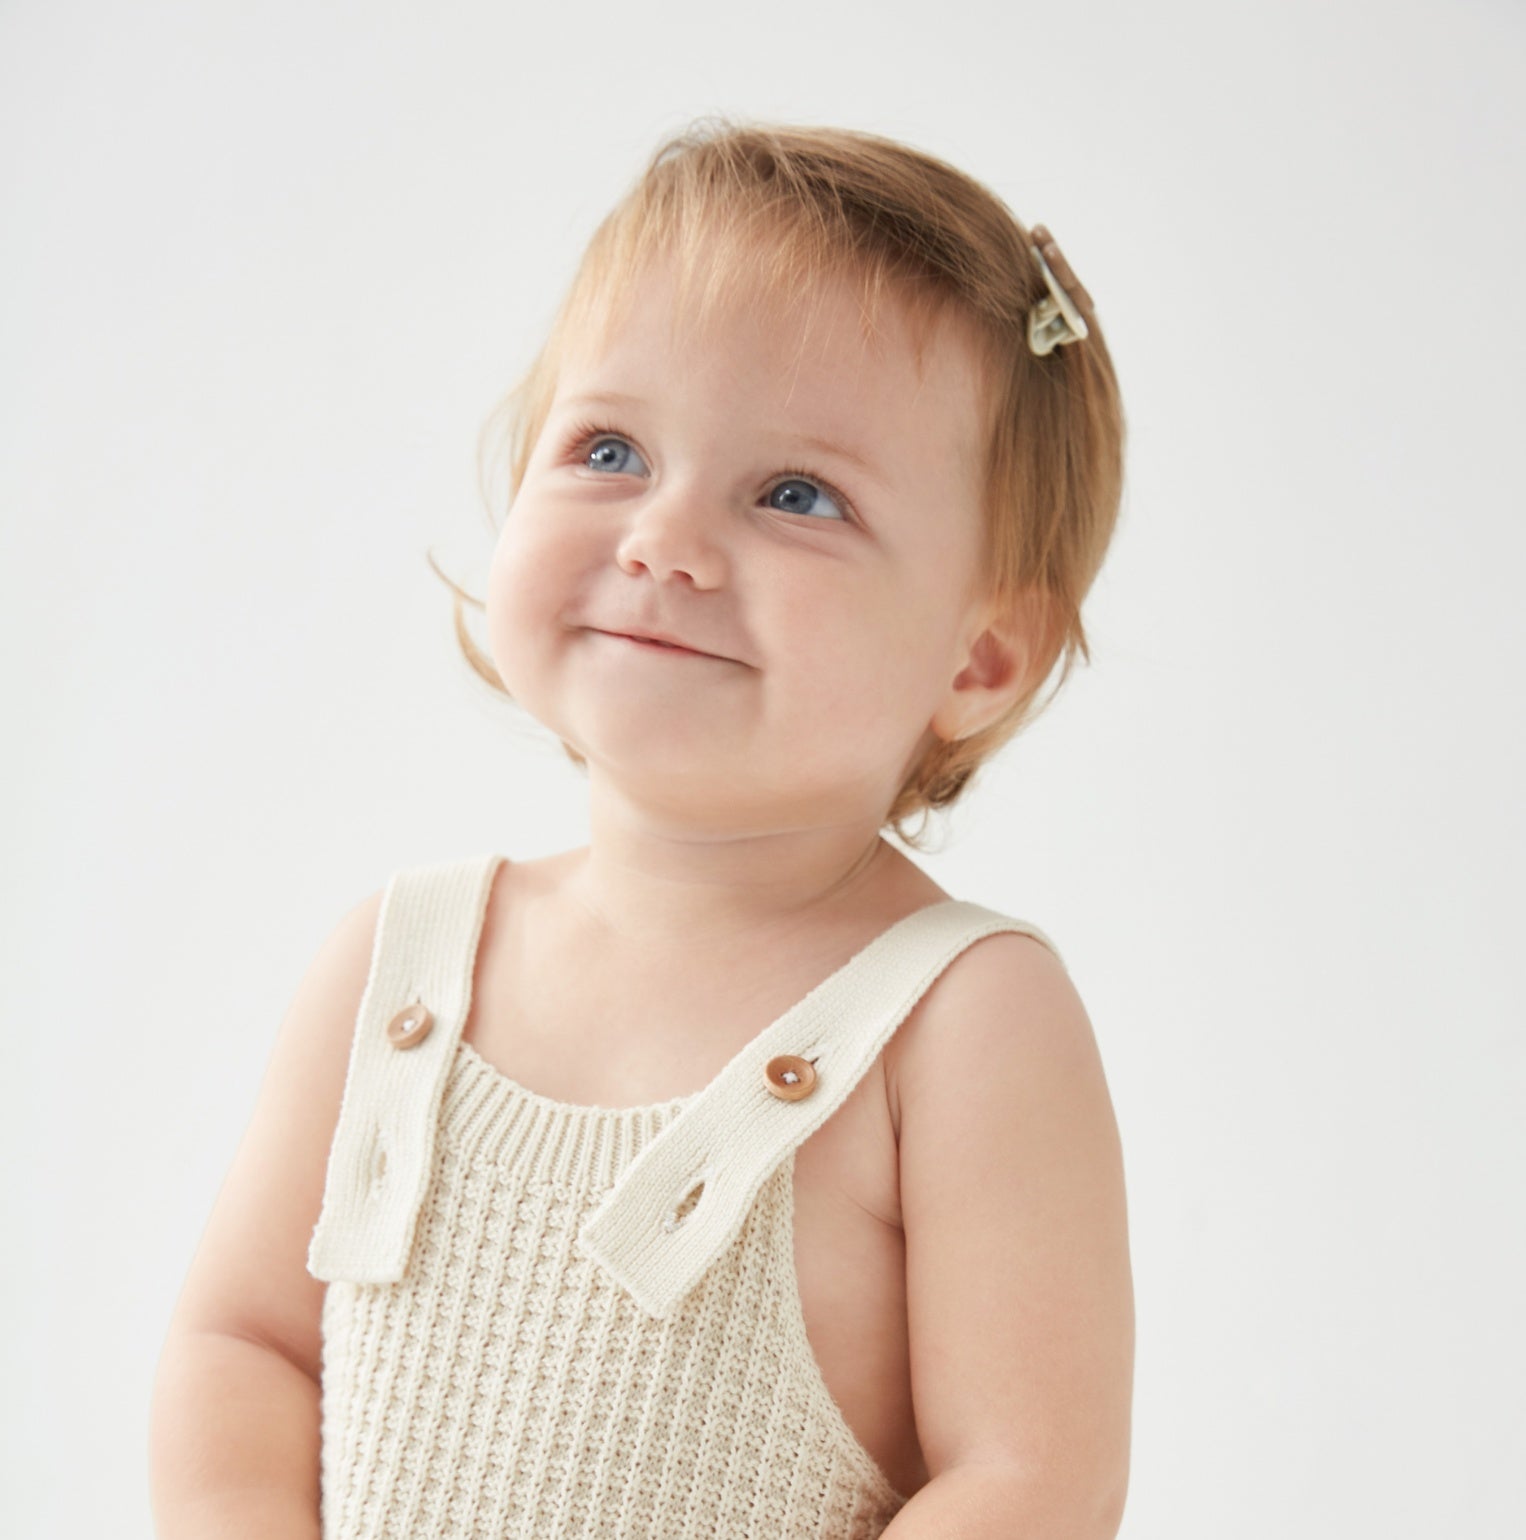 Baby Cotton Knit Overalls